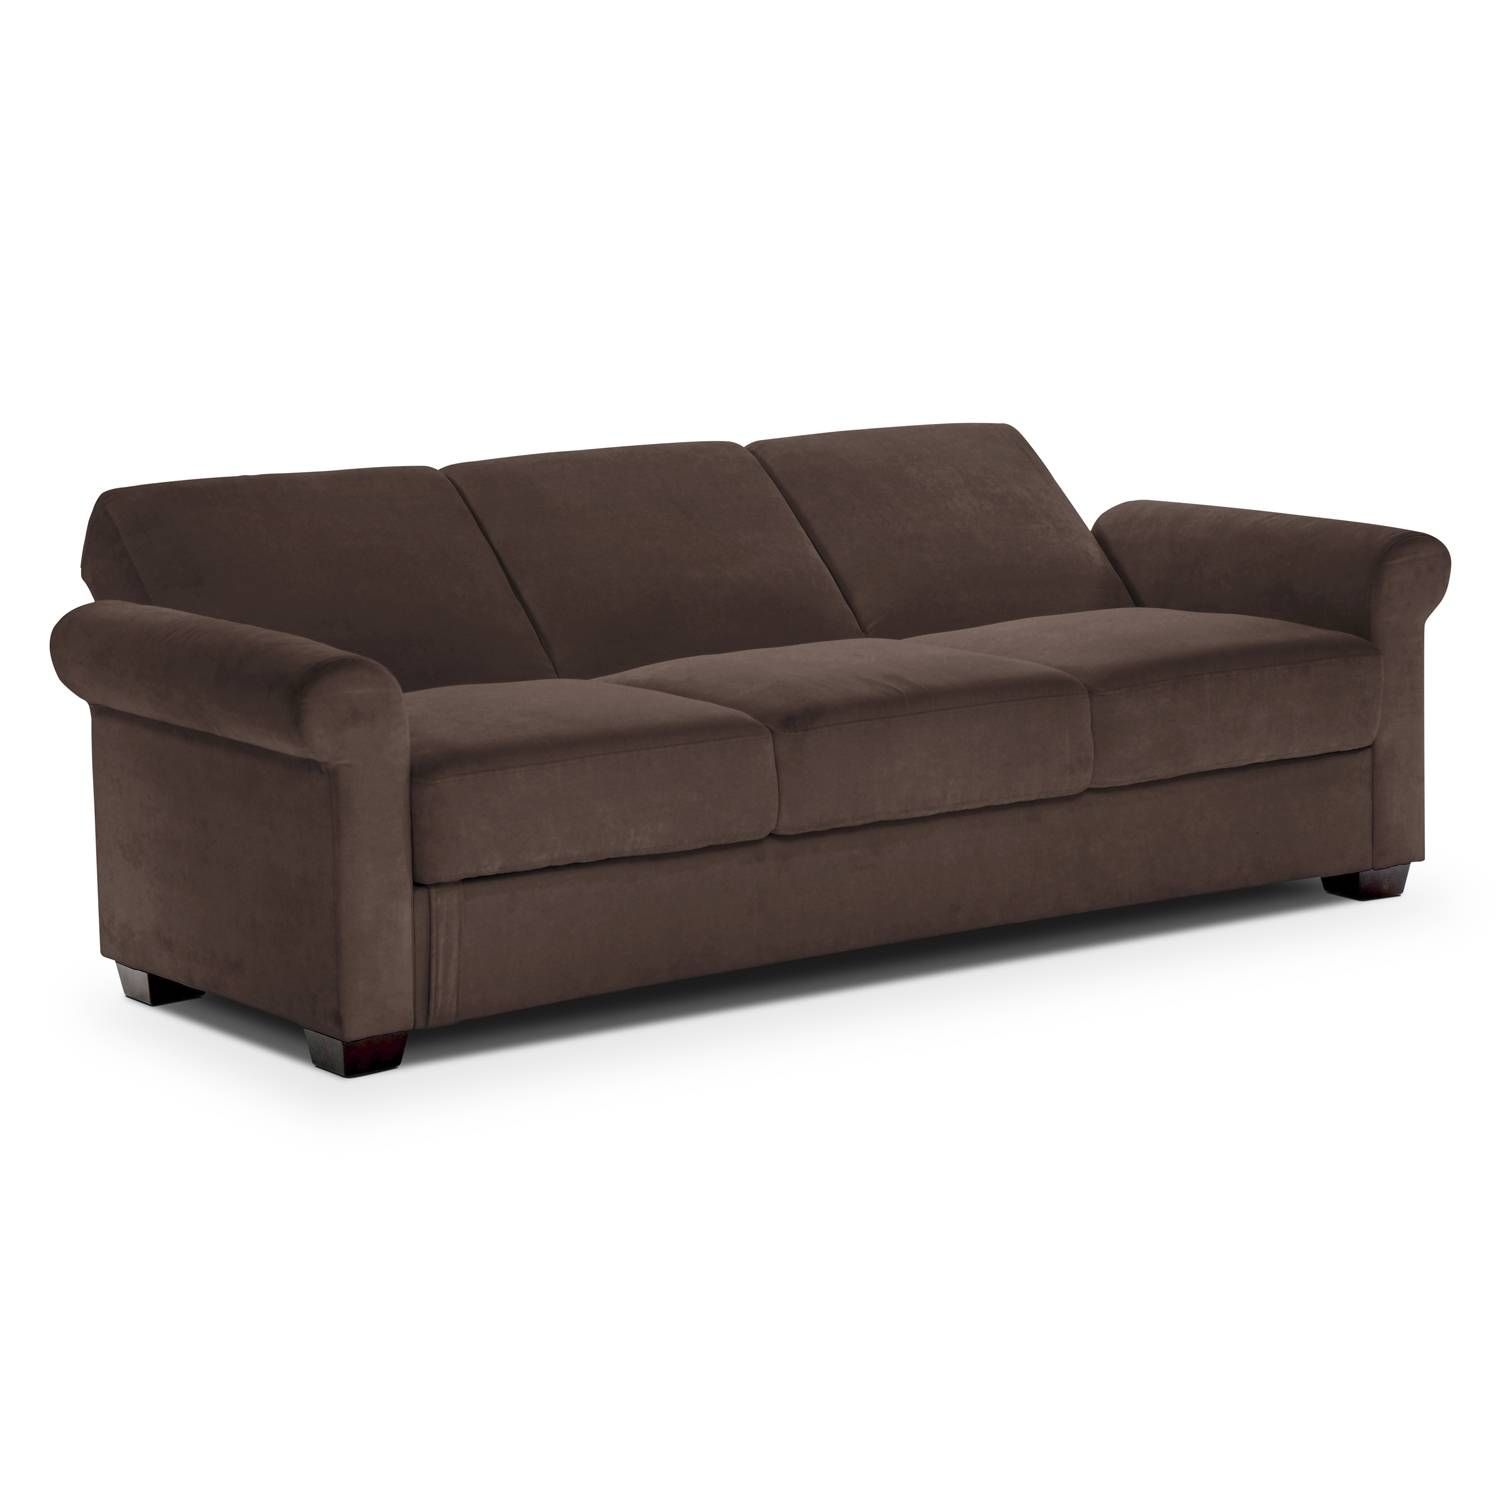 Thomas Futon Sofa Bed With Storage American Signature Furniture Inside American Sofa Beds (View 5 of 30)